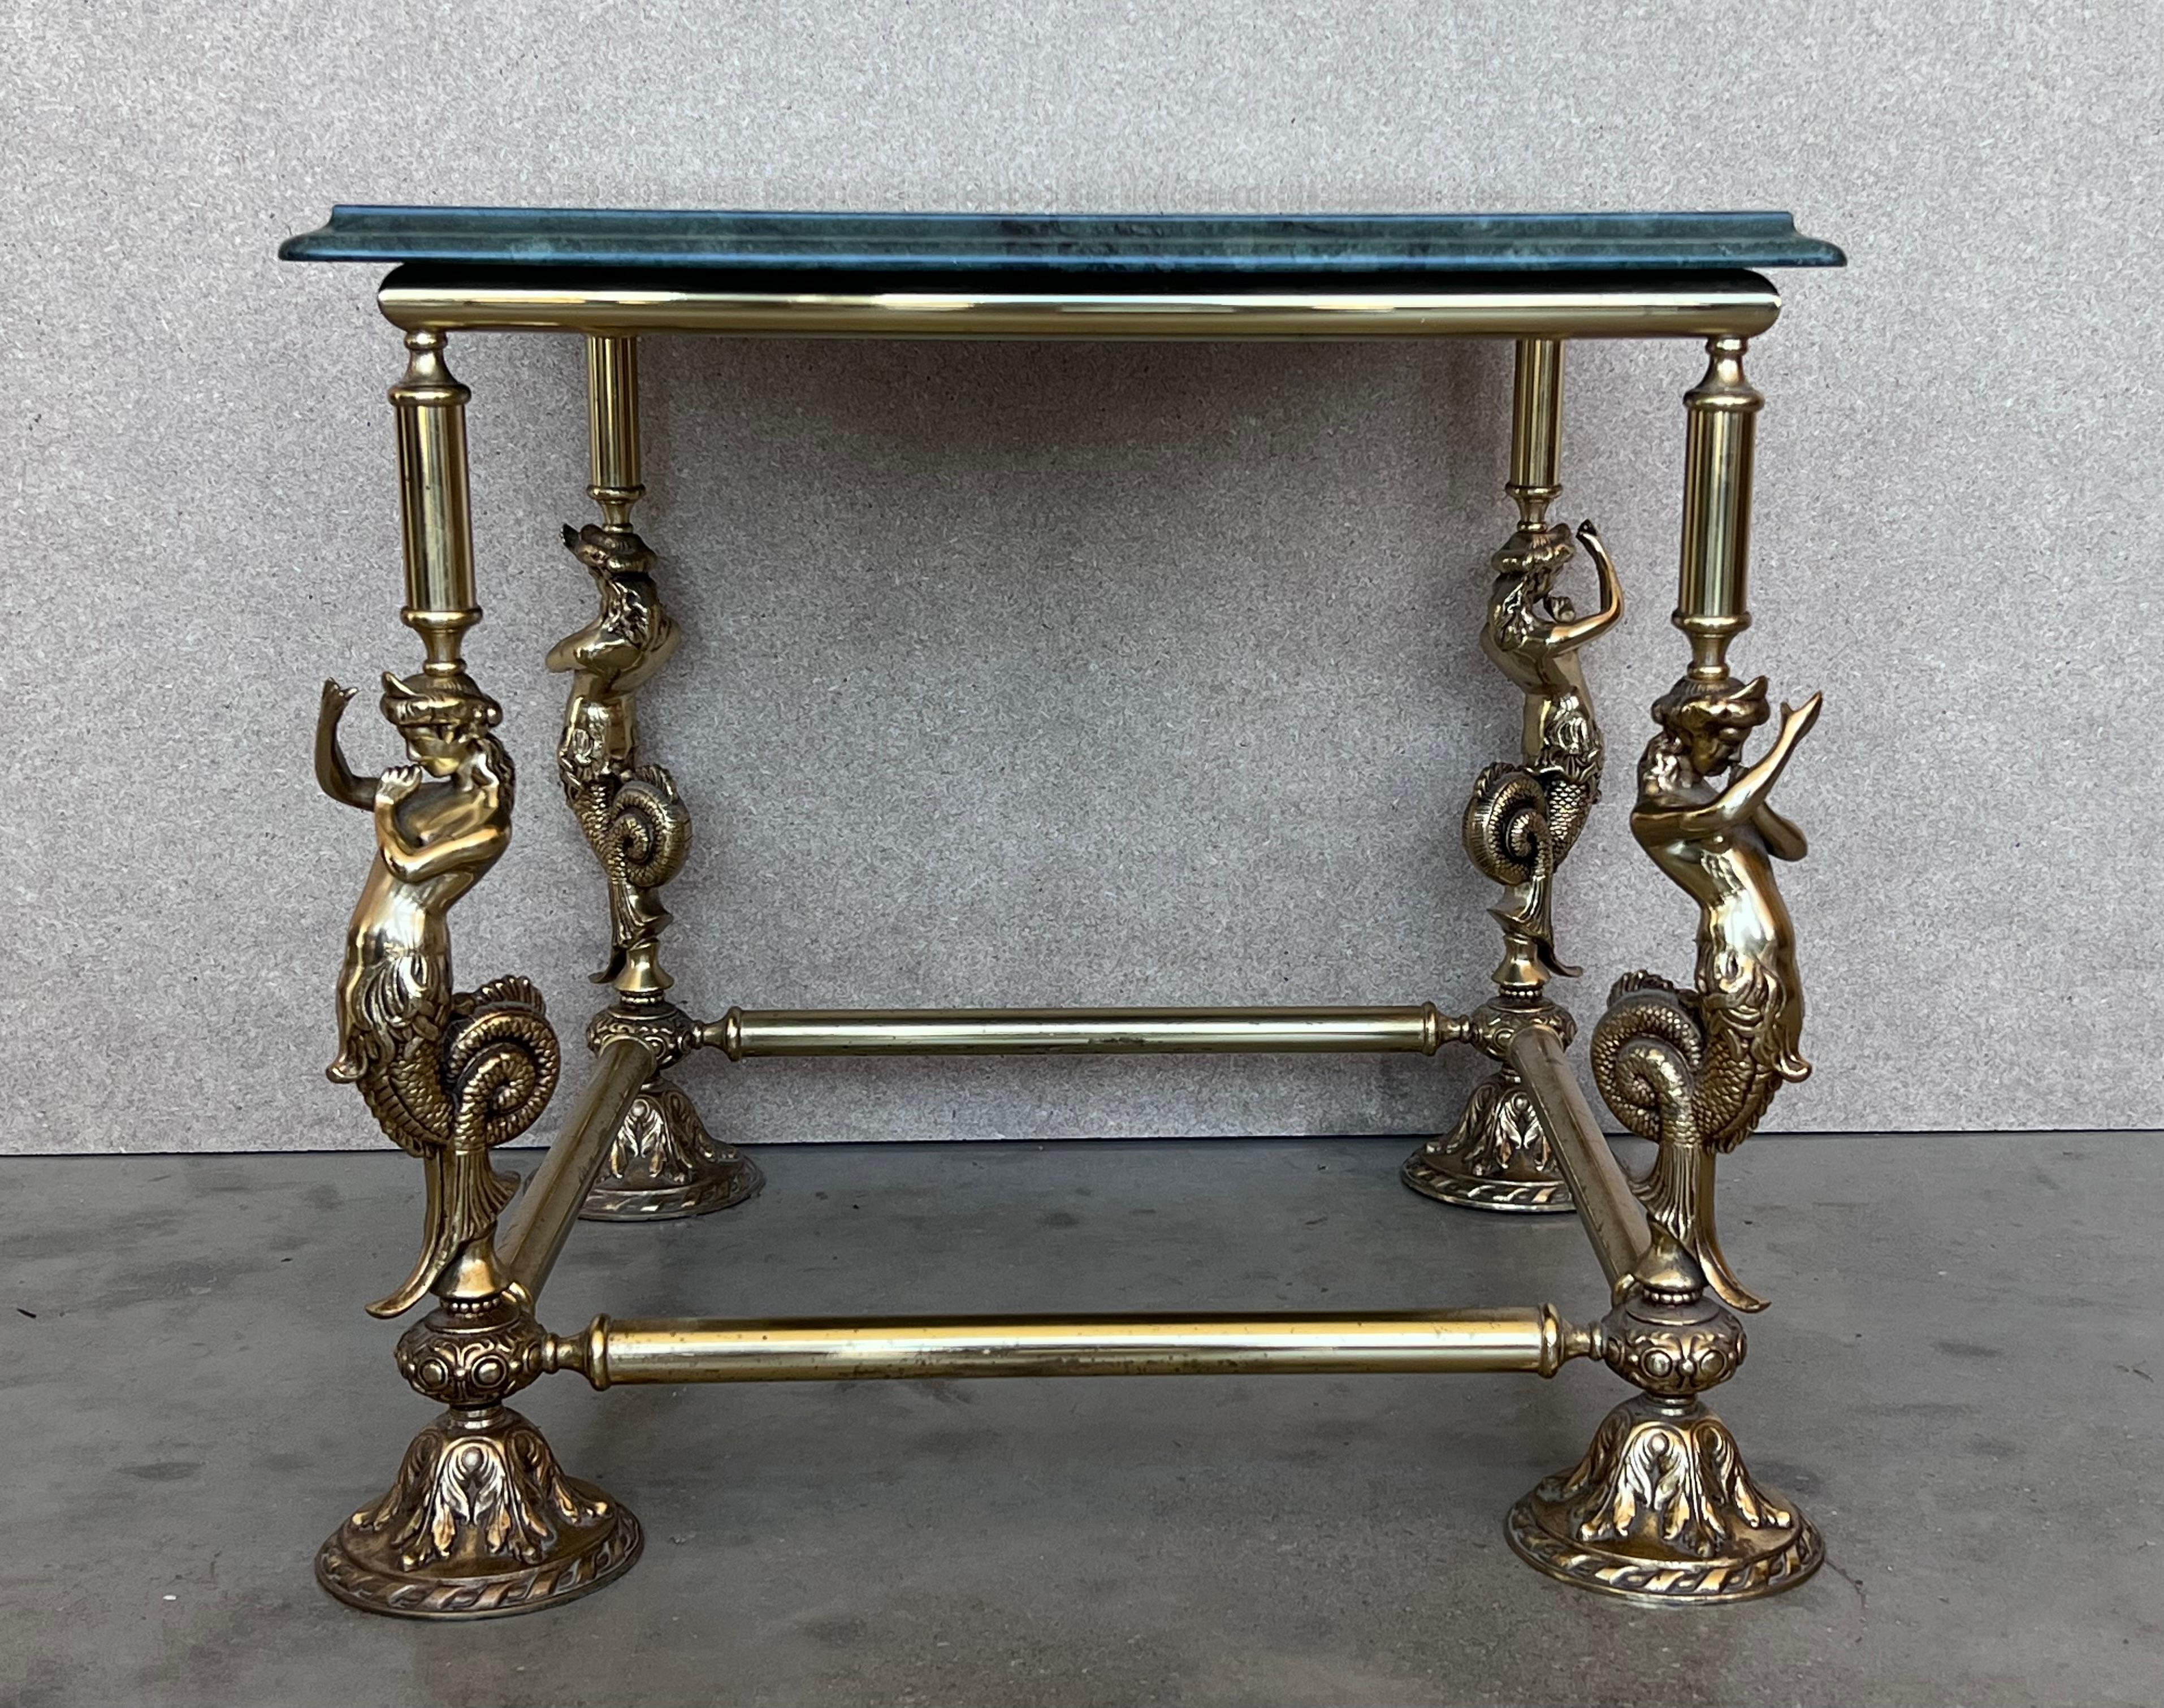 Gorgeous Gueridon or endtable with sculptures of fauns as a structure, patinated bronze and green marble top. The structure is made up of a four legs as a shaft and a square bronze base that supports the countertop. The sophisticated touch is